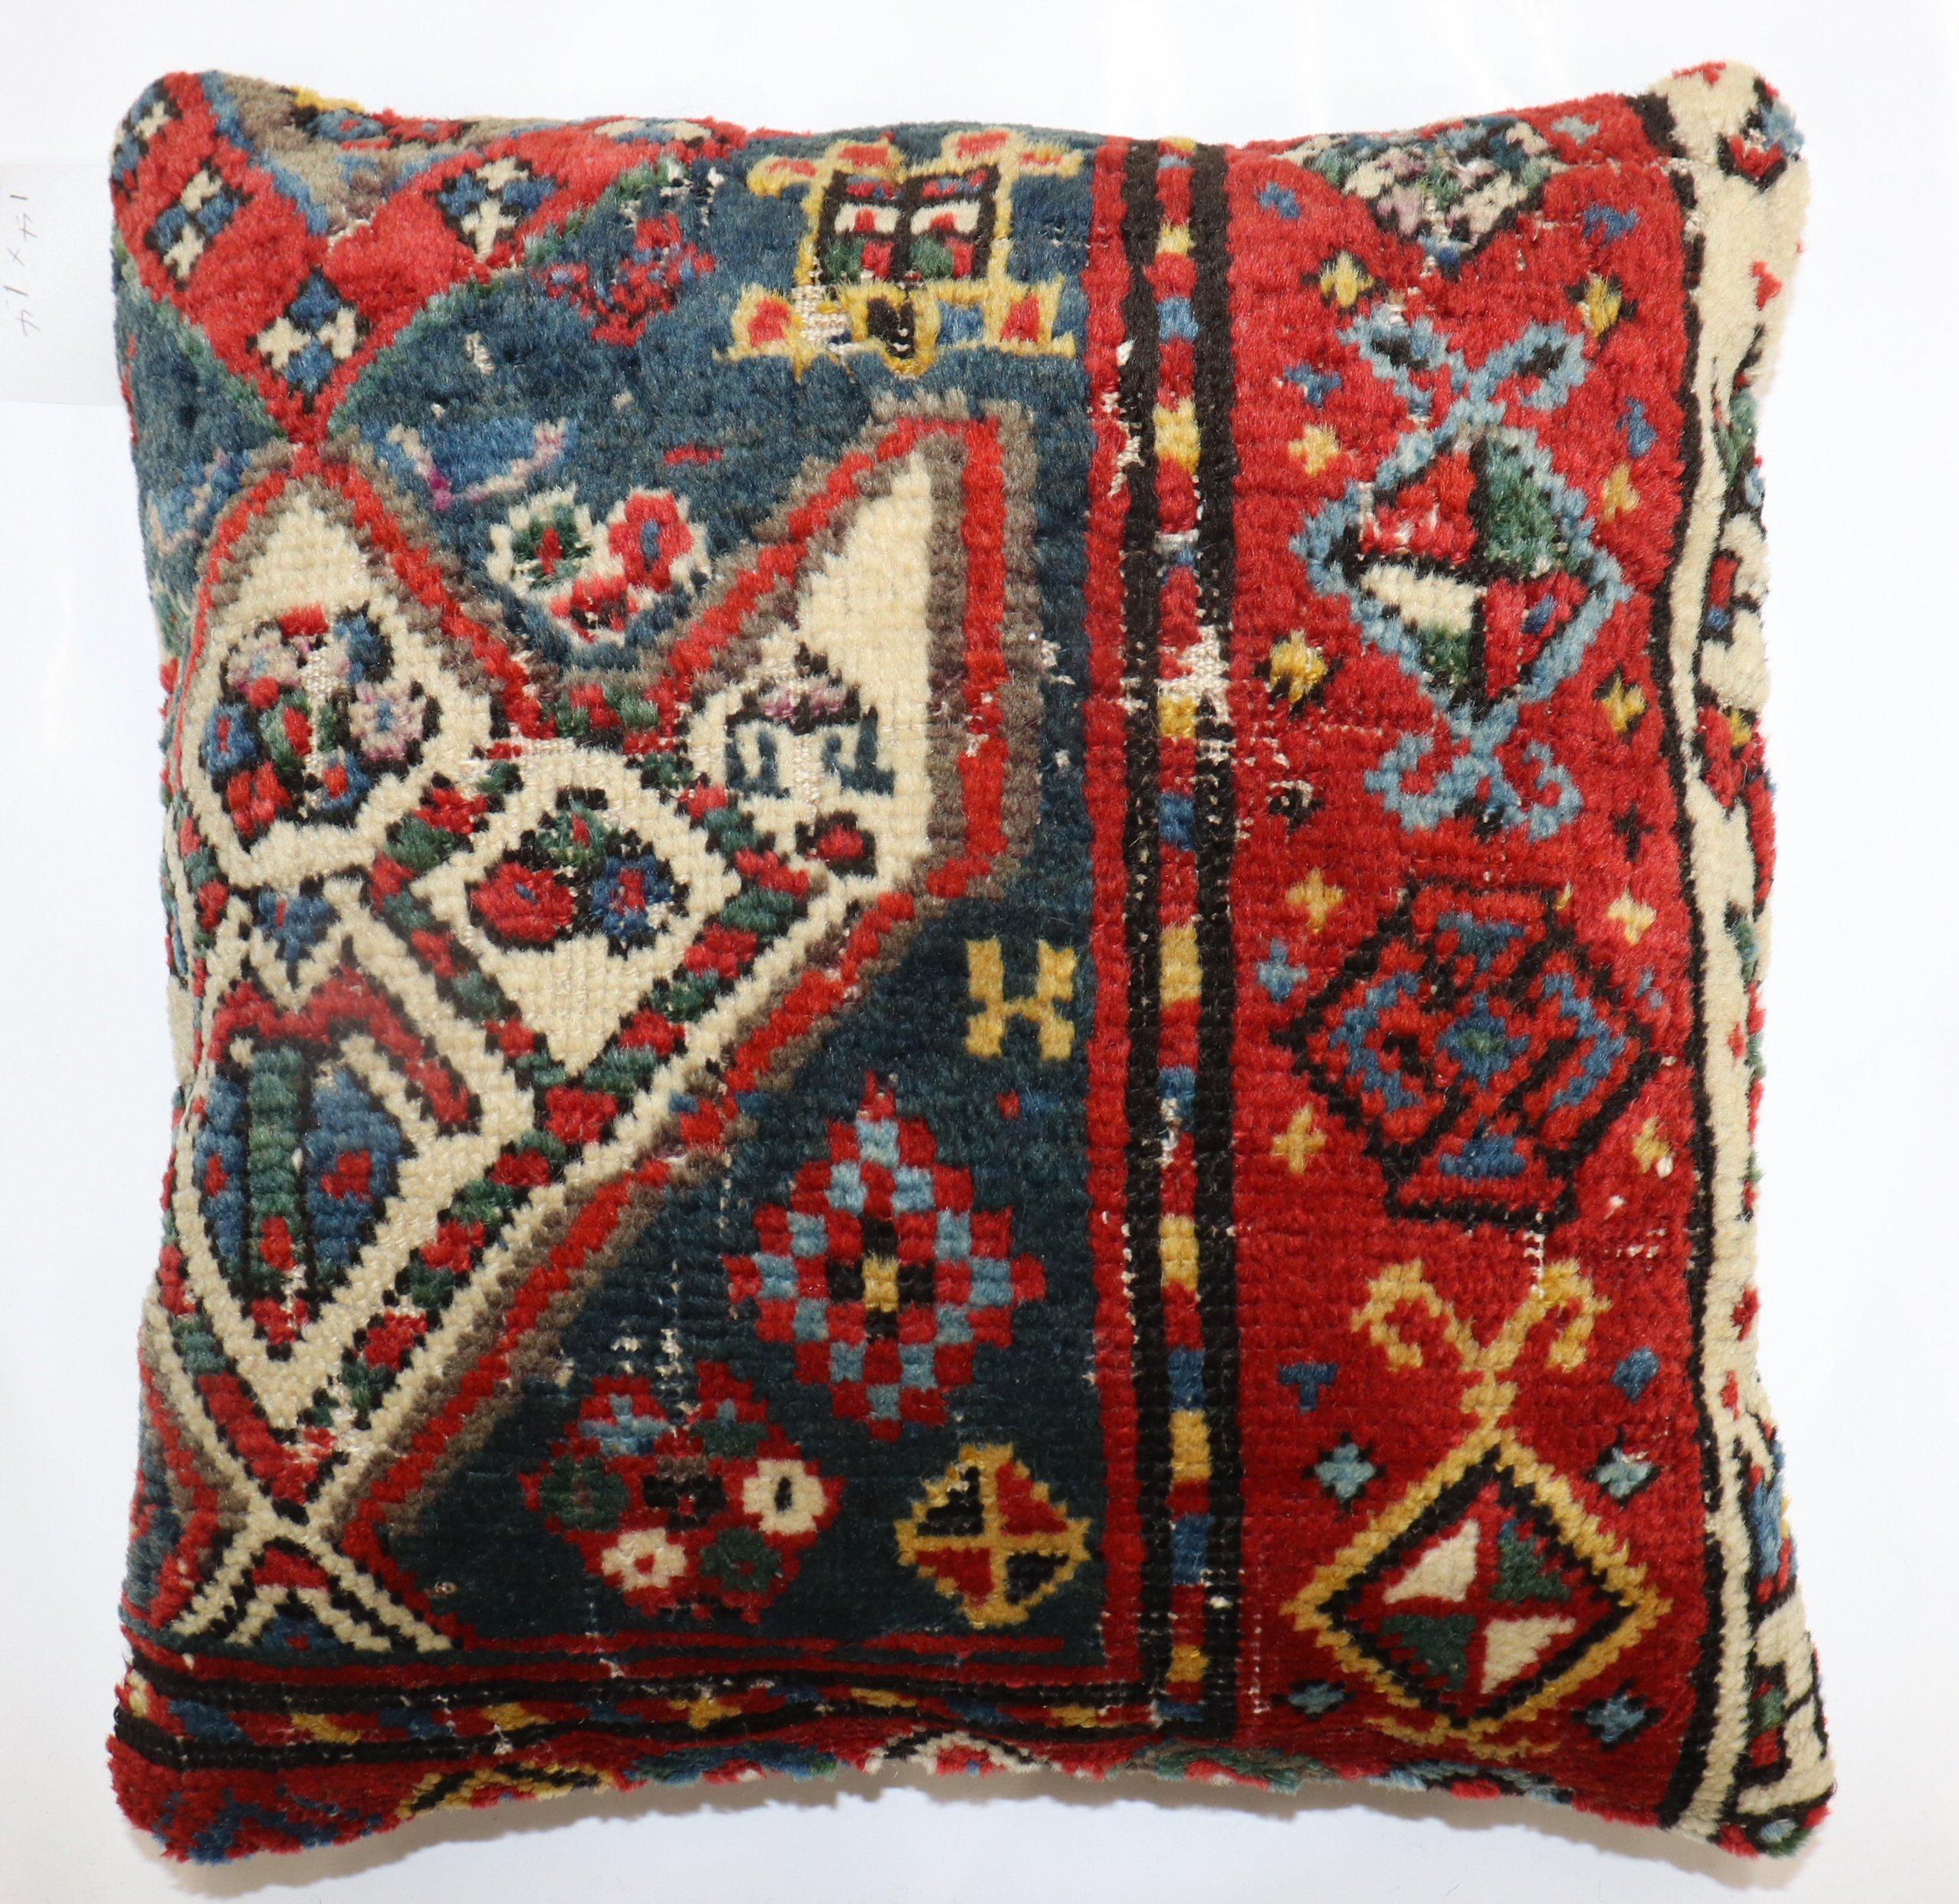 Pillow made from an early 20th century Caucasian rug. zipper closure and poly-fill insert provided.

Measures: 16